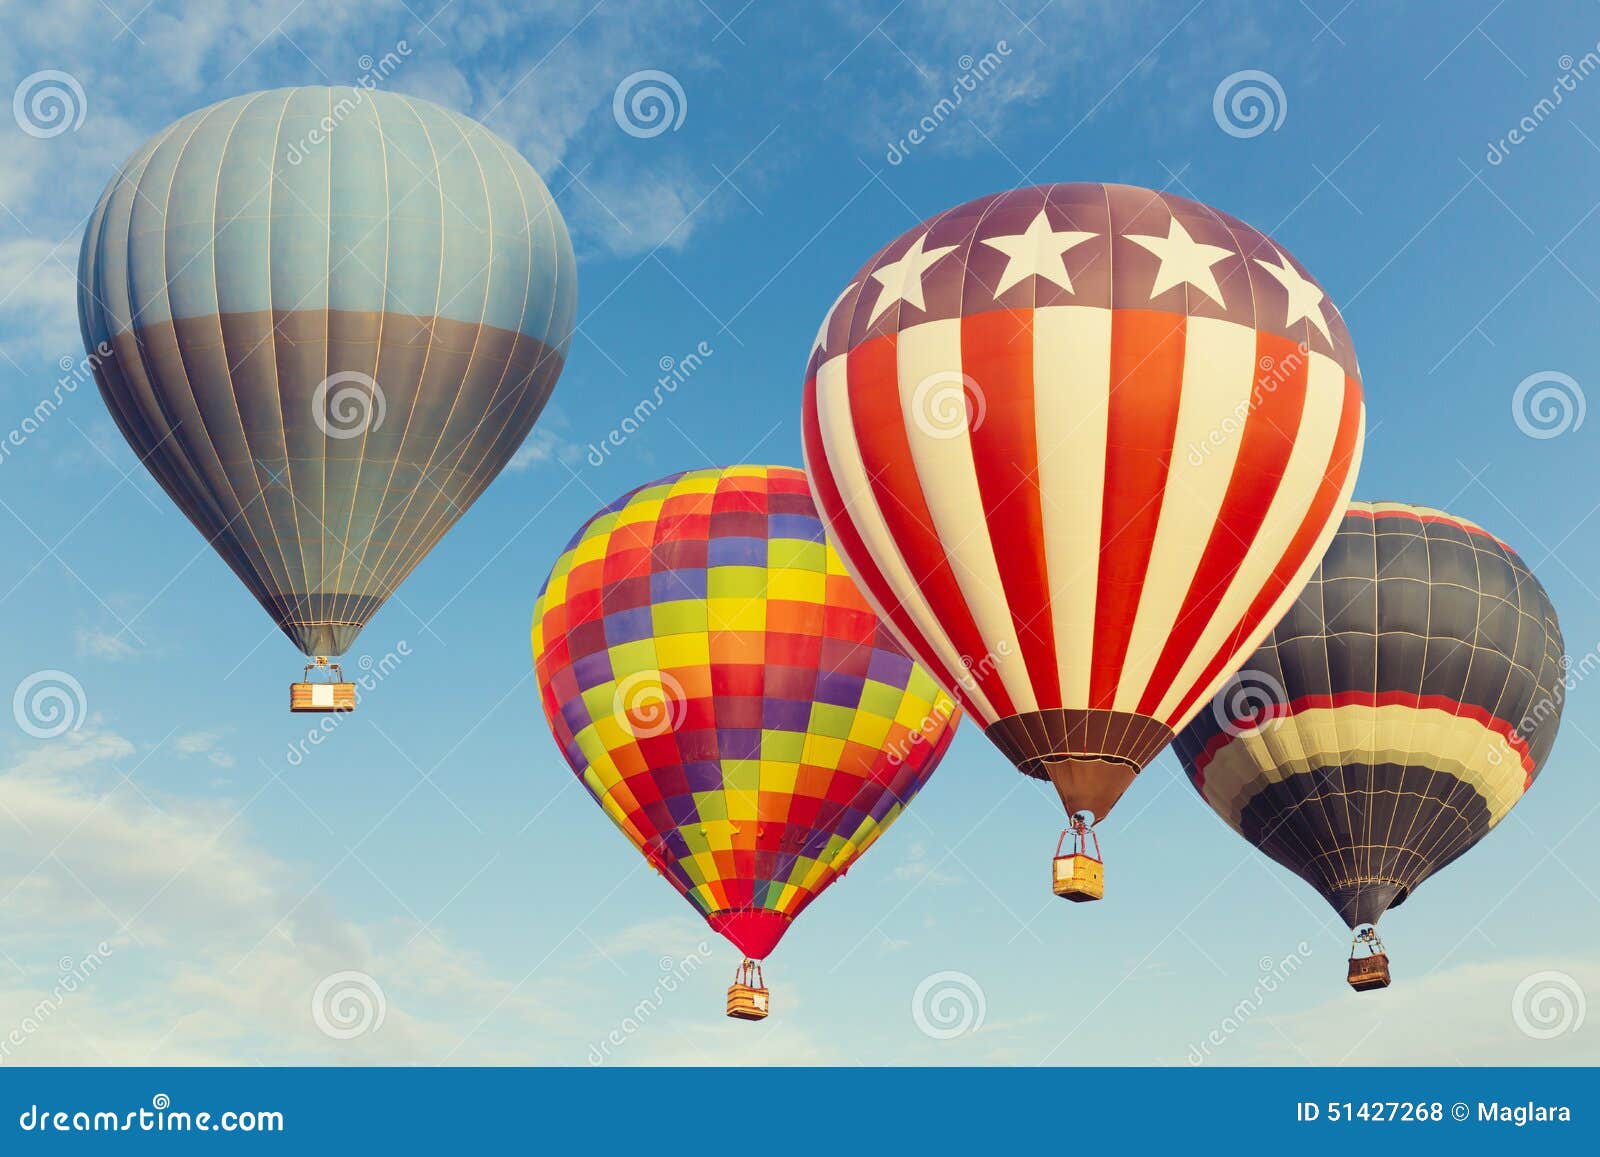 hot air balloons flying over blue sky